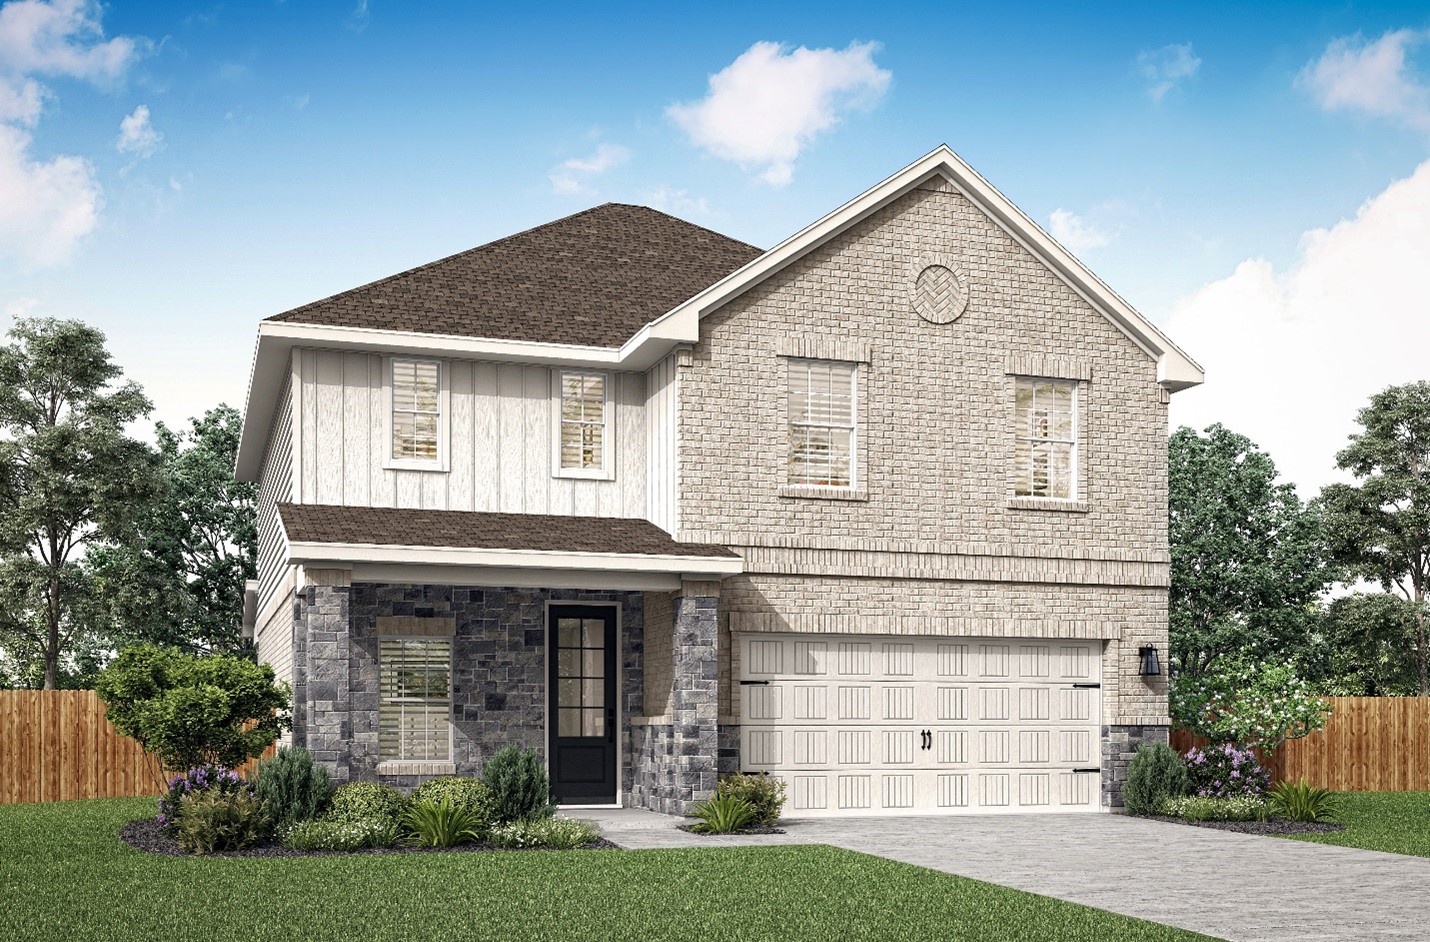 The Shelby plan by LGI Homes